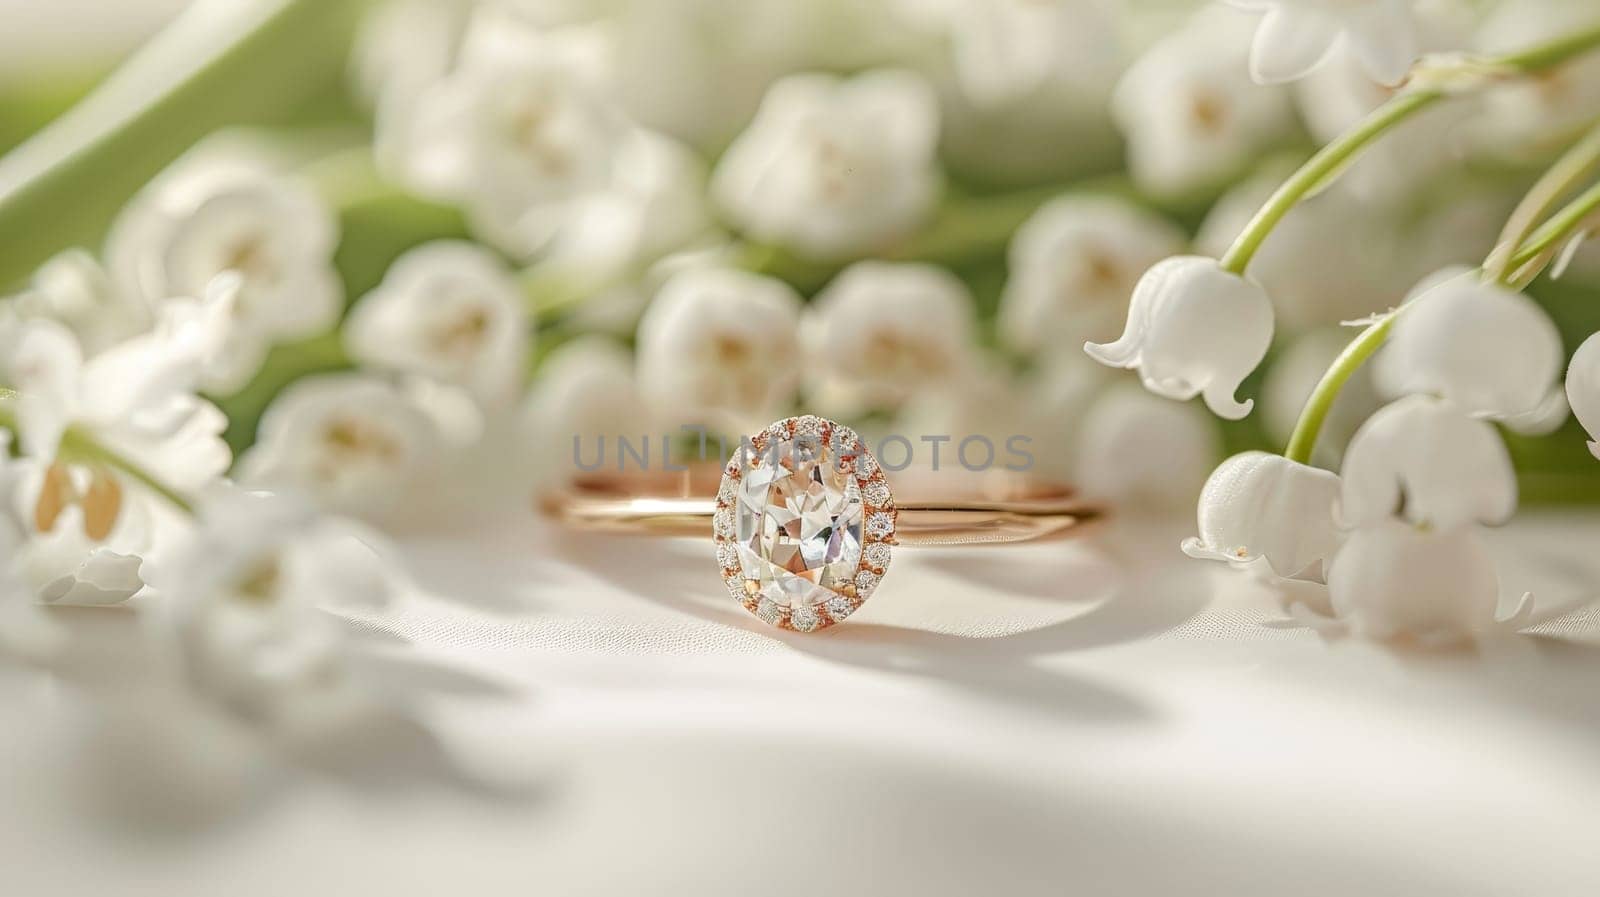 A ring with a white stone and gold band is set on a table with flowers by nijieimu